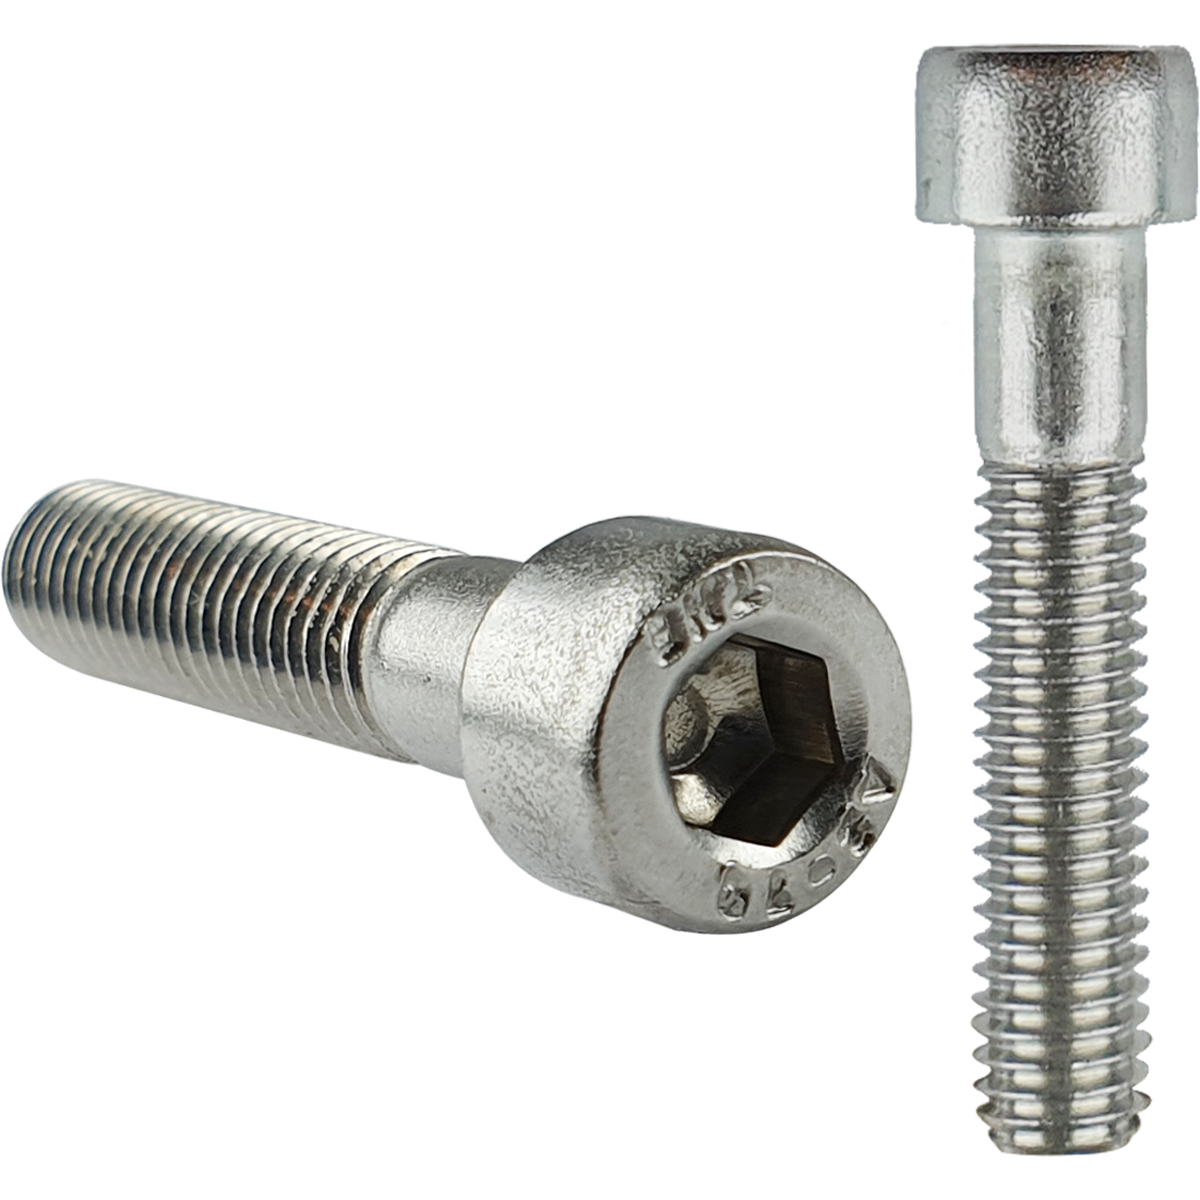 Corrosion resistant, A2 stainless steel, socket cap screws with a unified national fine thread (UNF).